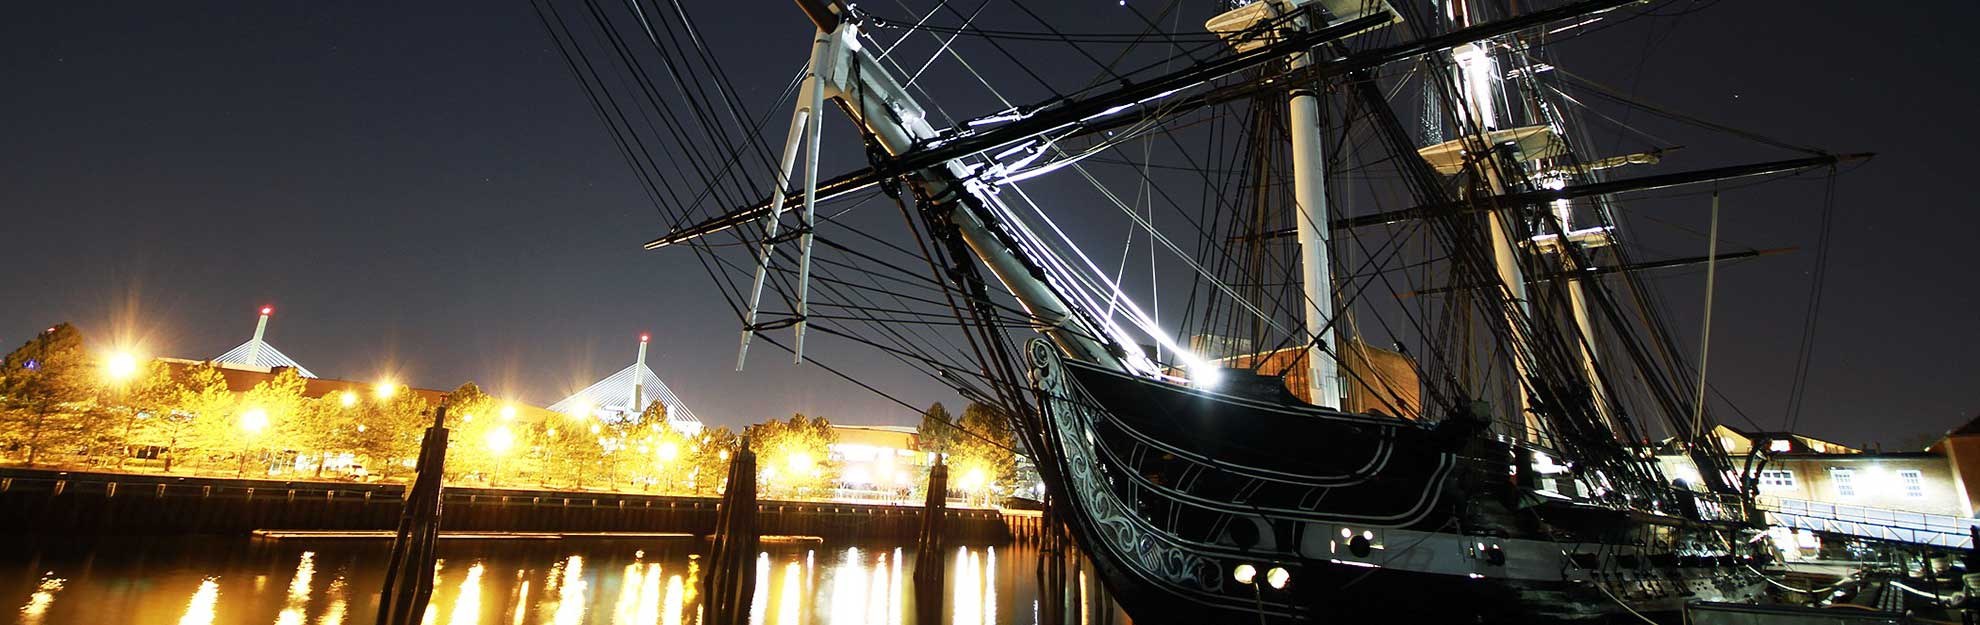 USS Constitution at the Boston harbour quay at night.